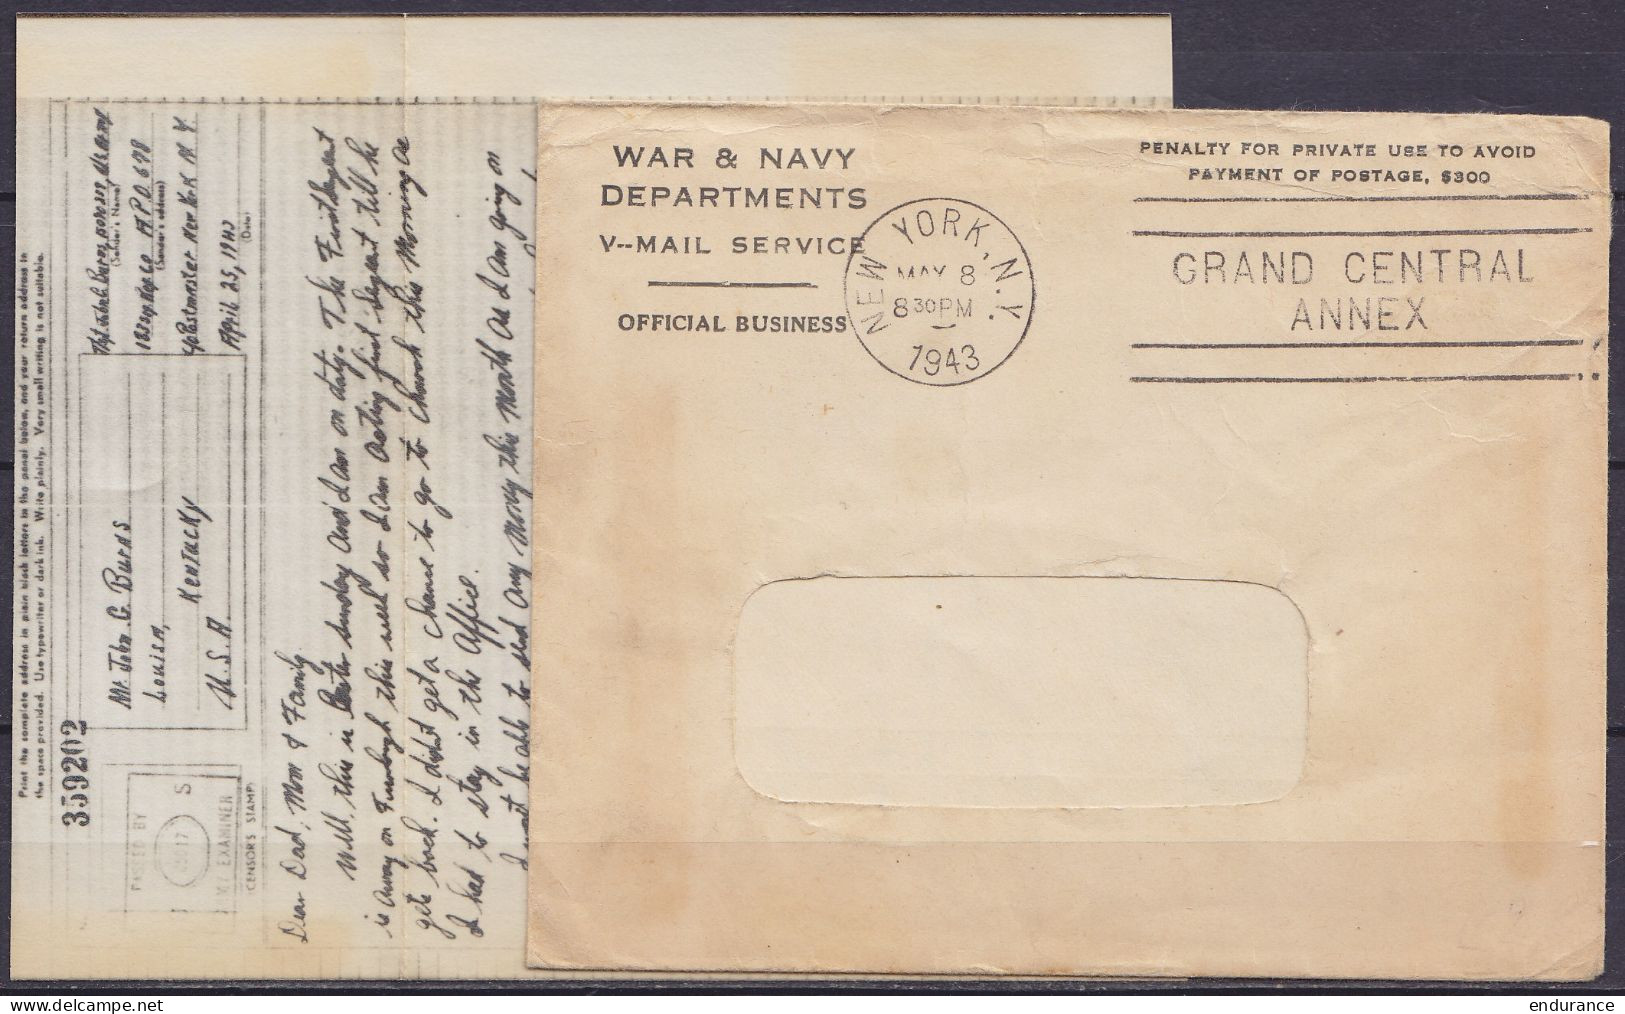 USA - V-MAIL WAR & NAVY DEPARTMENT Flam. "NEW YORK /MAY 8 1943/ GRAND CENTRAL ANNEX" Pour LOUISA Kentucky - Briefe U. Dokumente